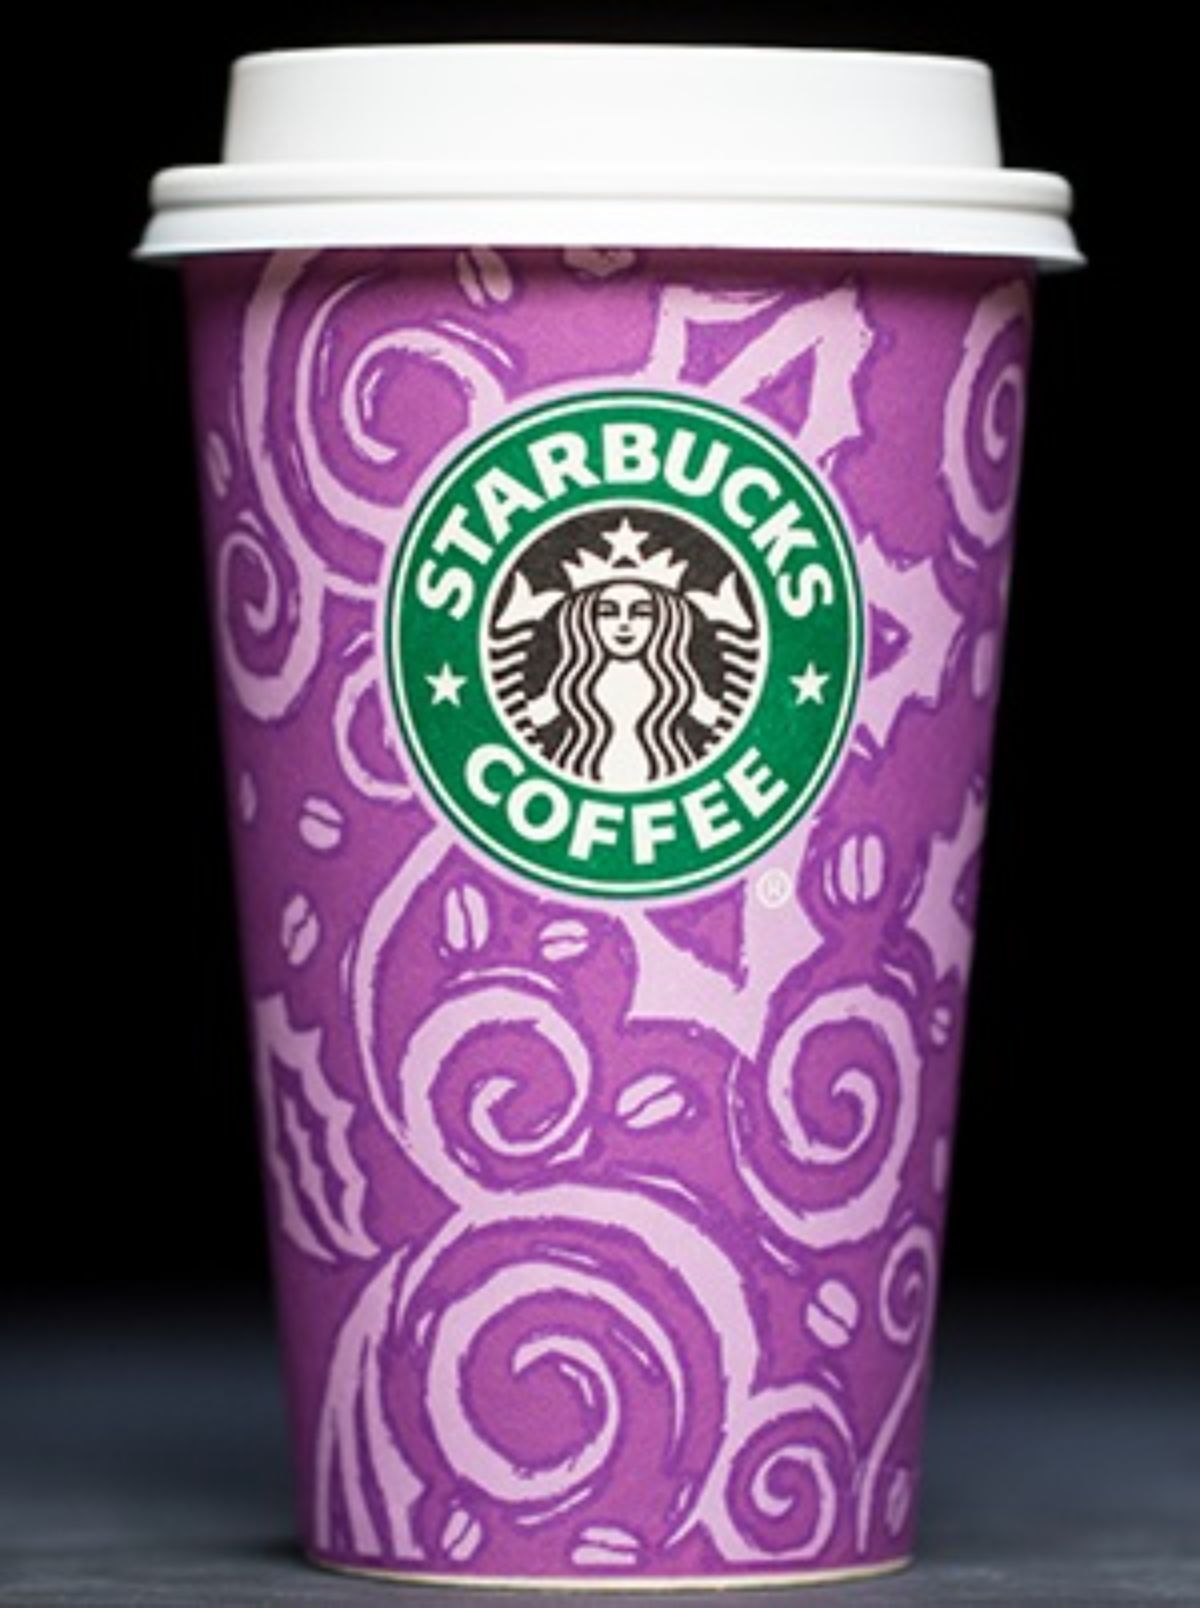 1997 starbucks holiday cup in purple